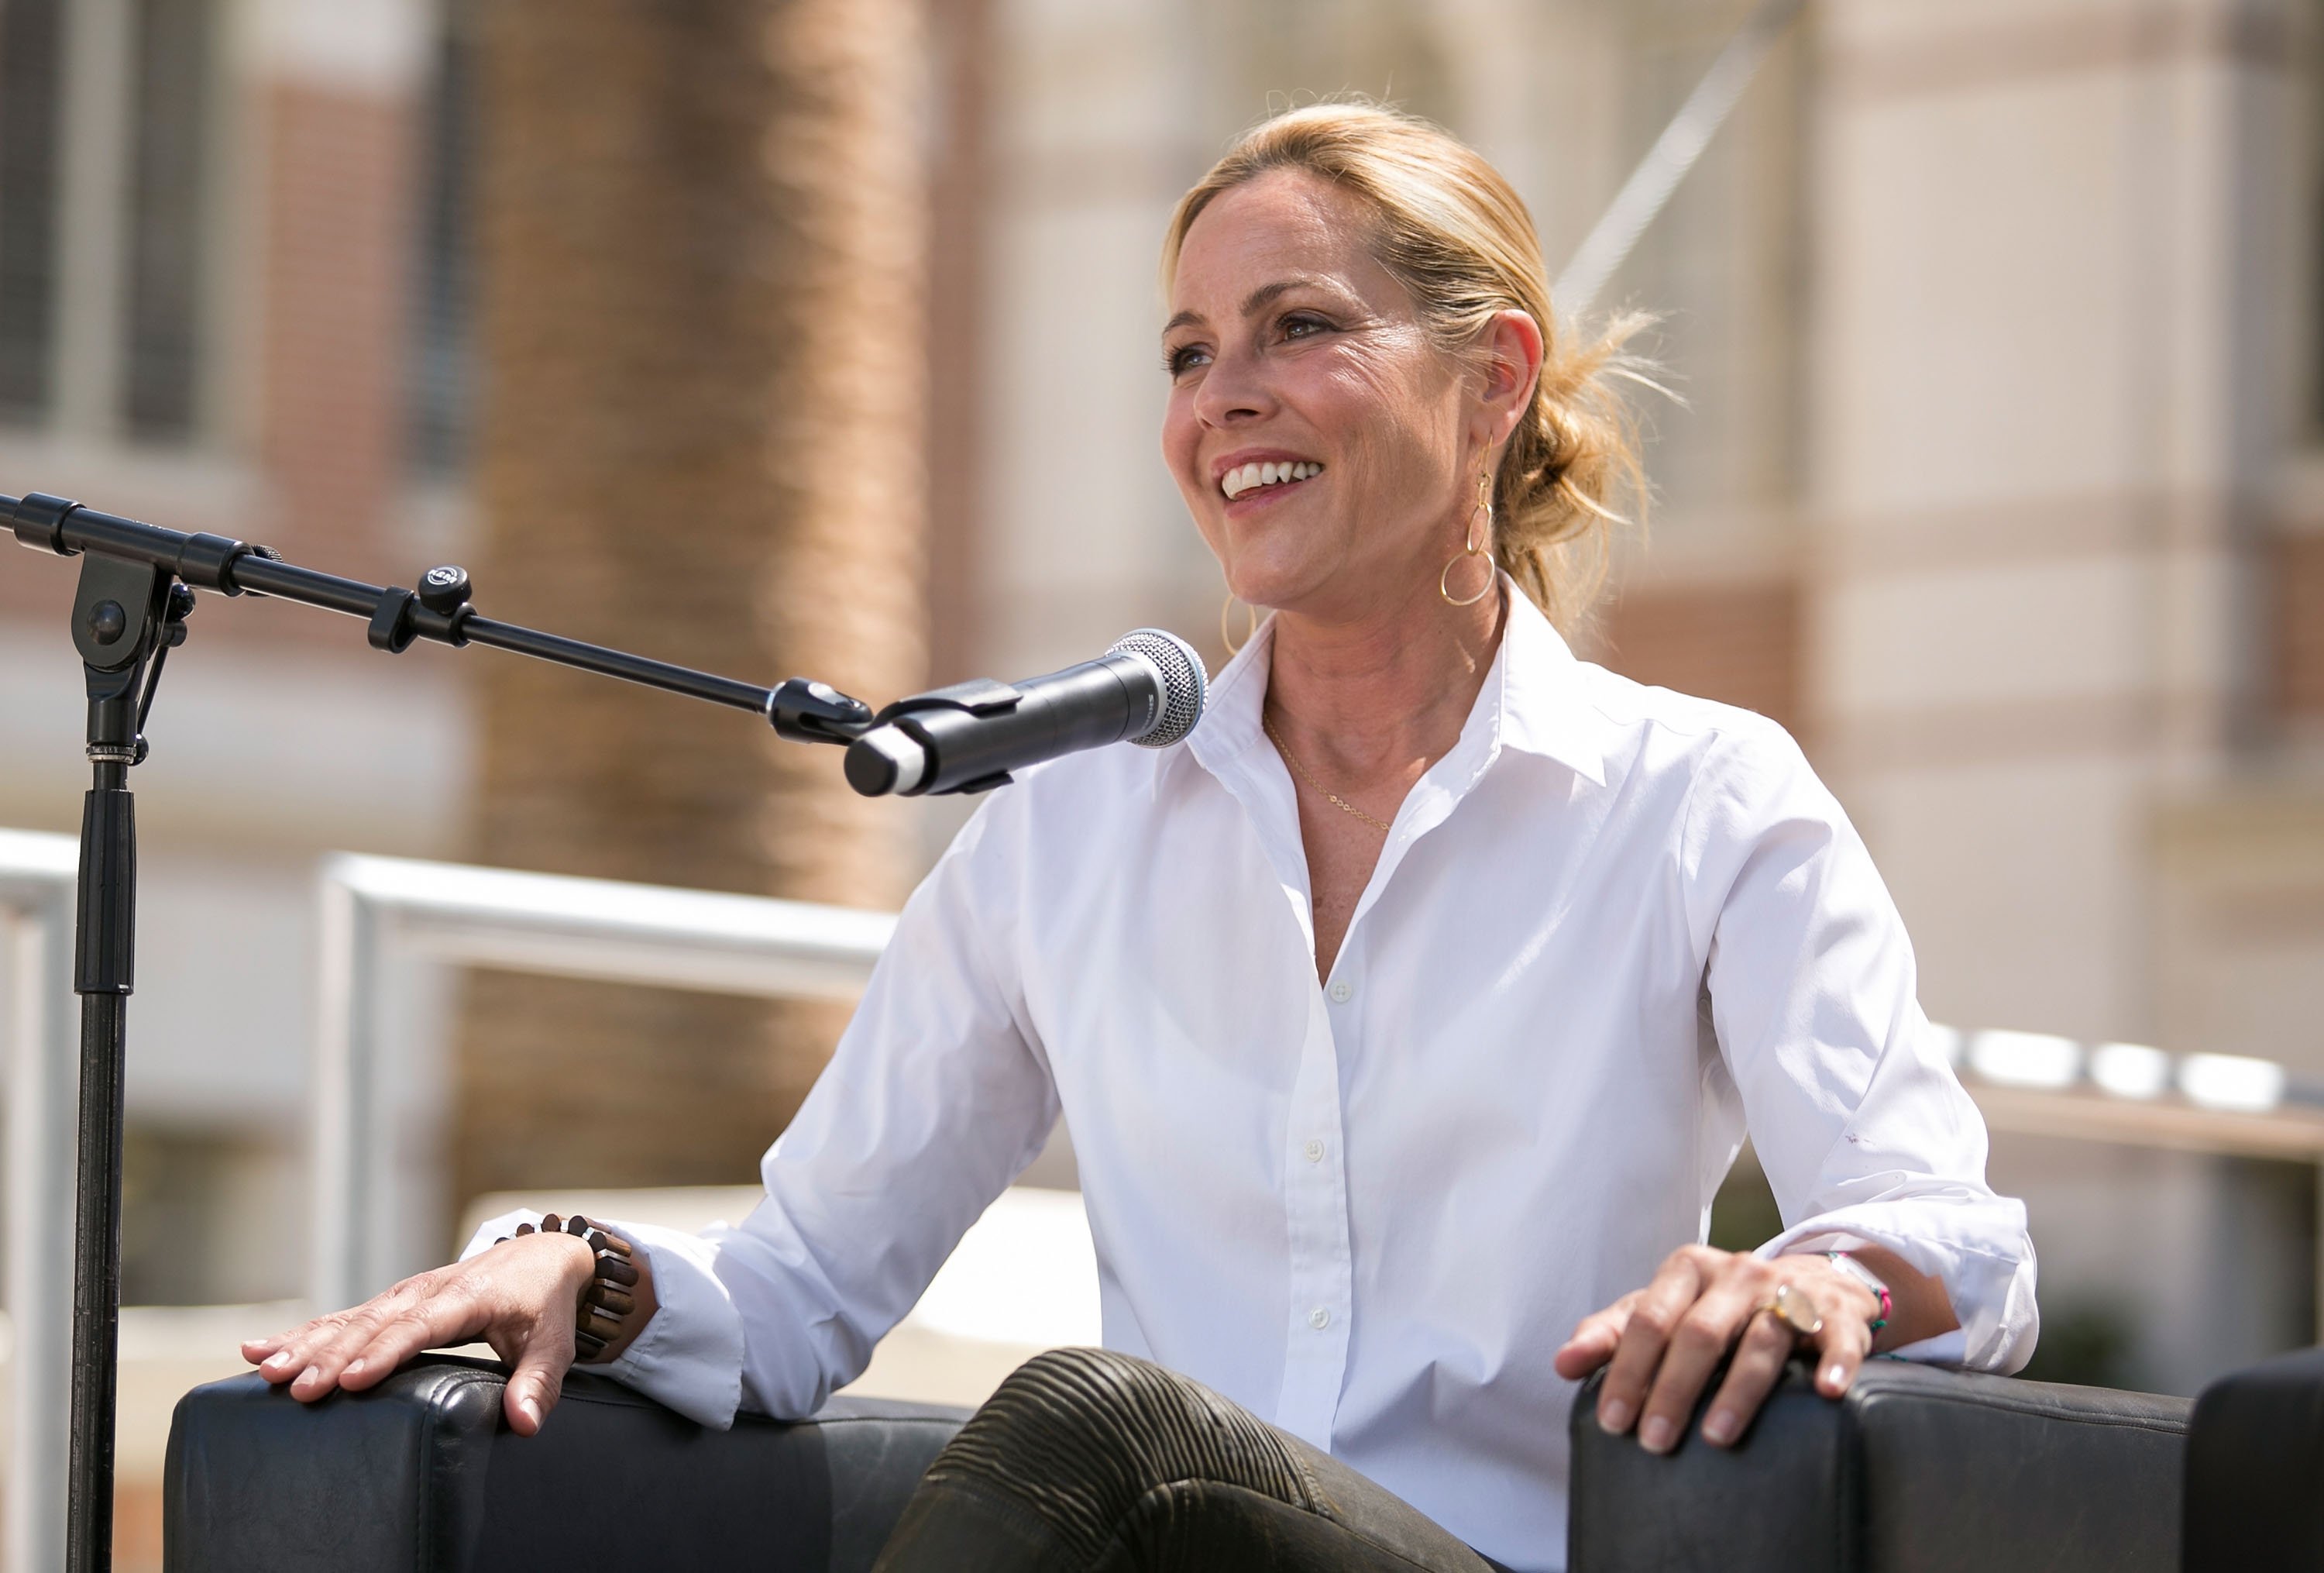 Maria Bello attends the 2015 Los Angeles Times Festival of Books at USC on April 18, 2015 | Photo: GettyImages